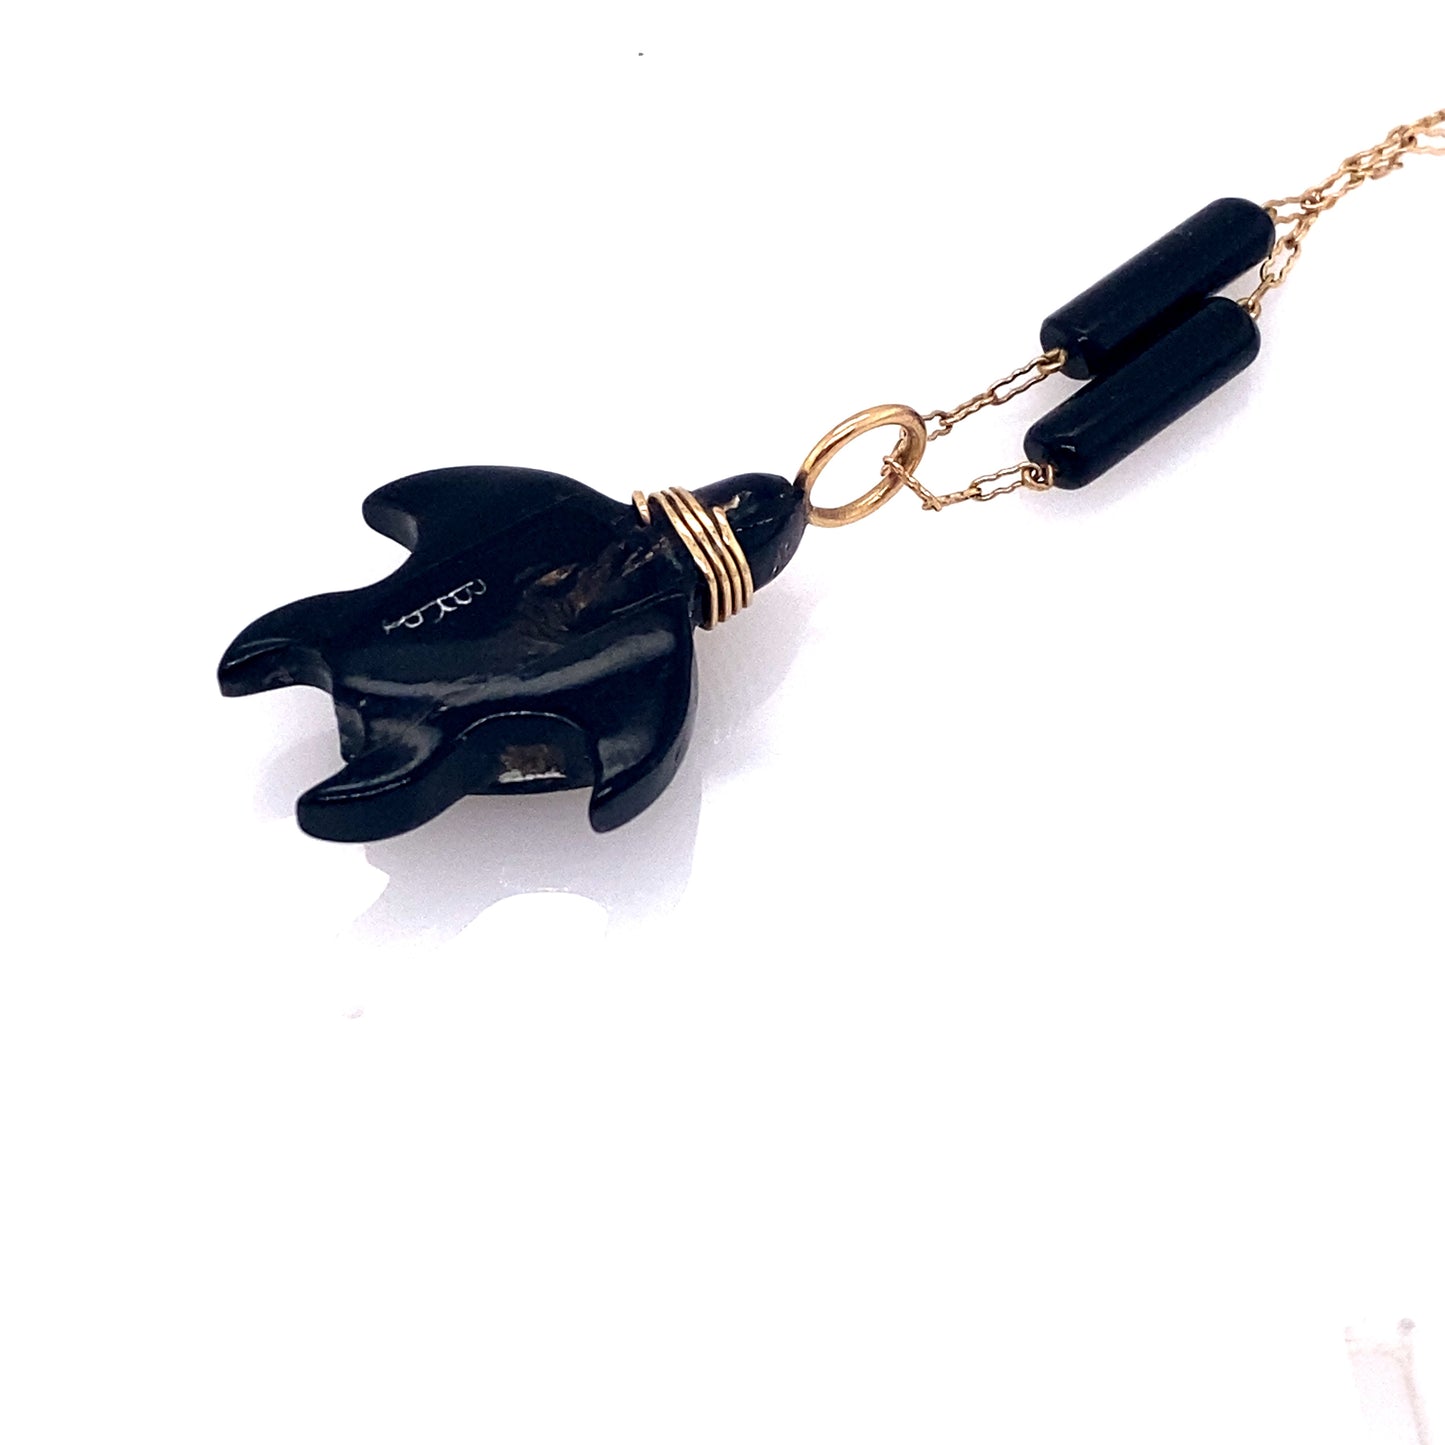 Circa 1950s Carved Onyx Station Necklace with Turtle Pendant in 14K Gold